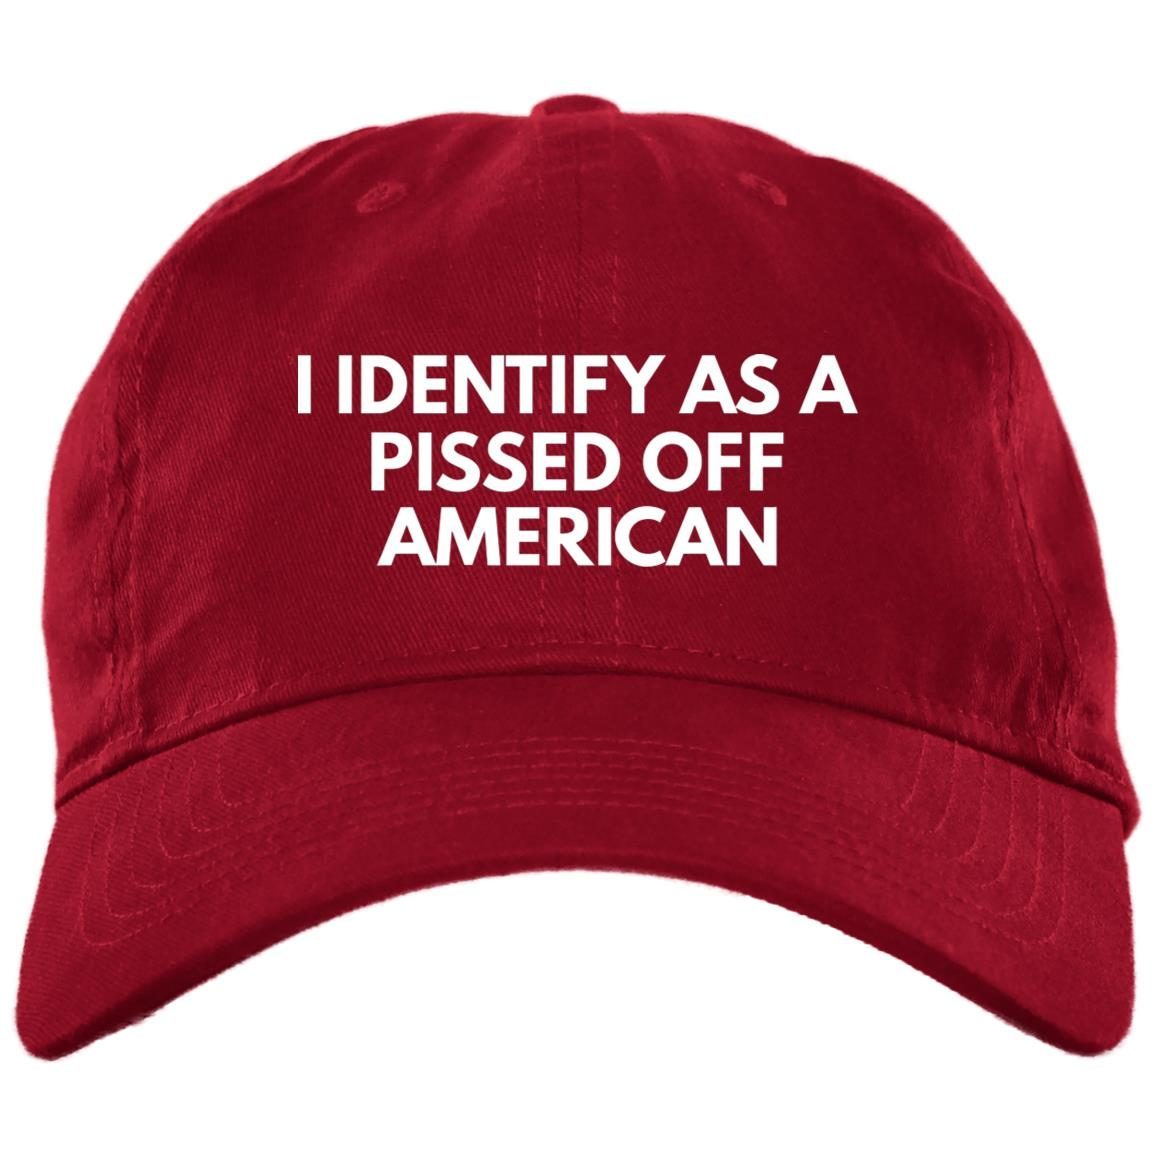 I Identify As A Pissed Off American Embroidered Hat Cap 7